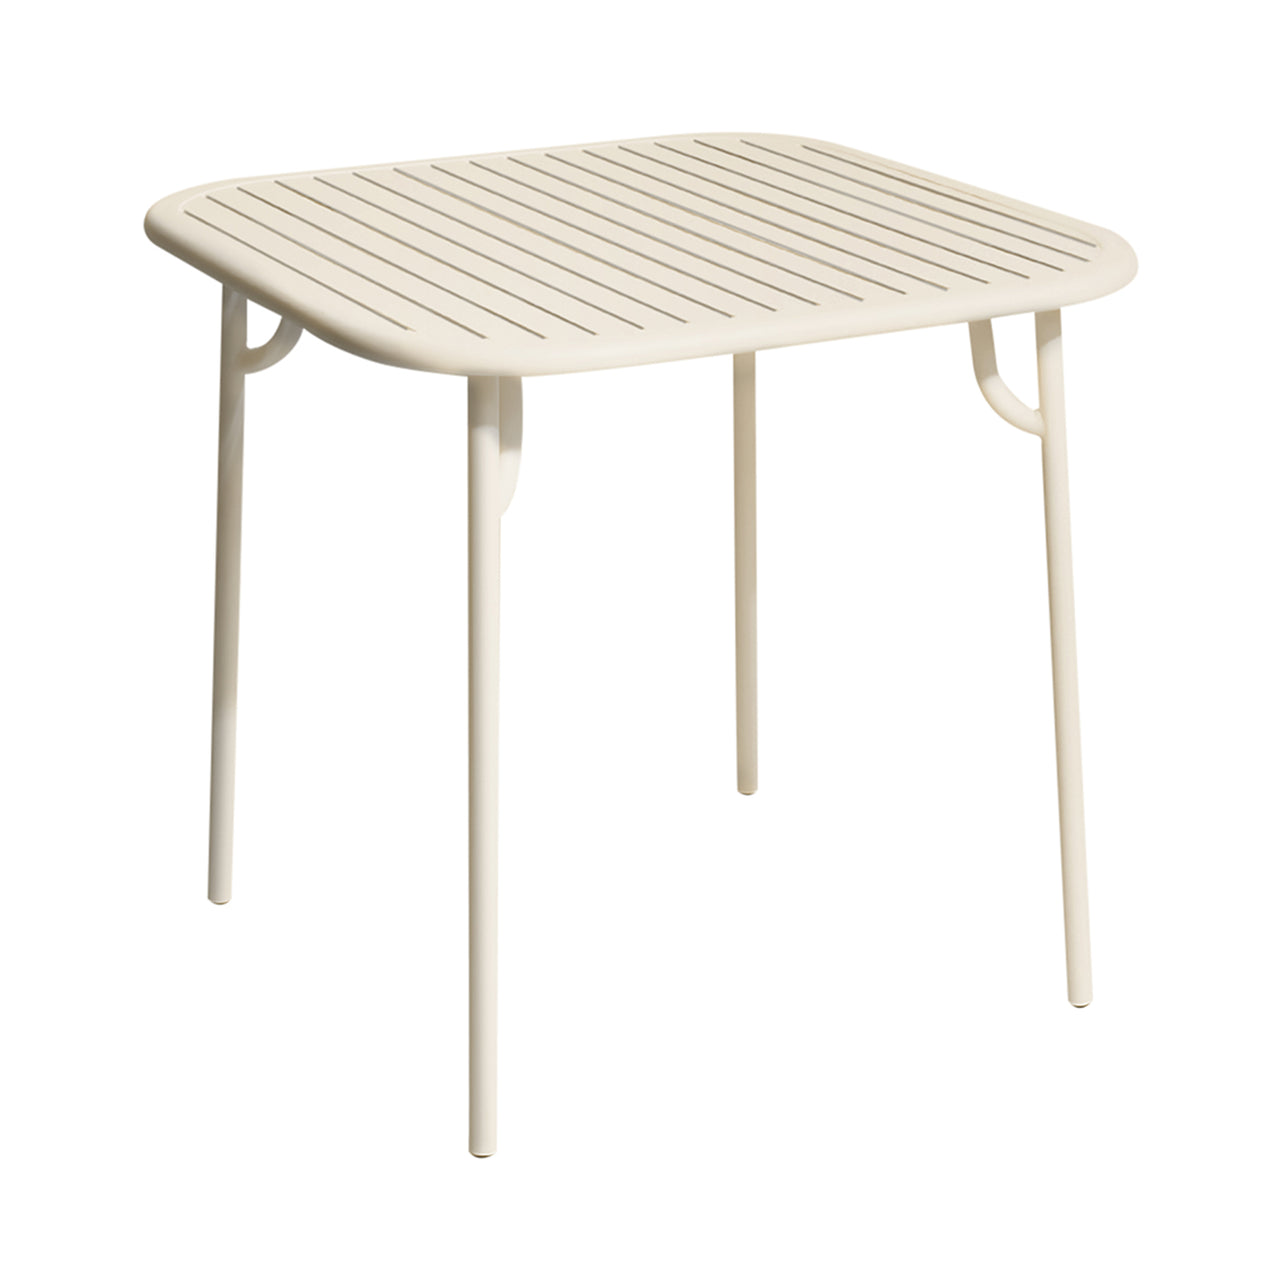 Week-End Square Dining Table with Slats: Ivory